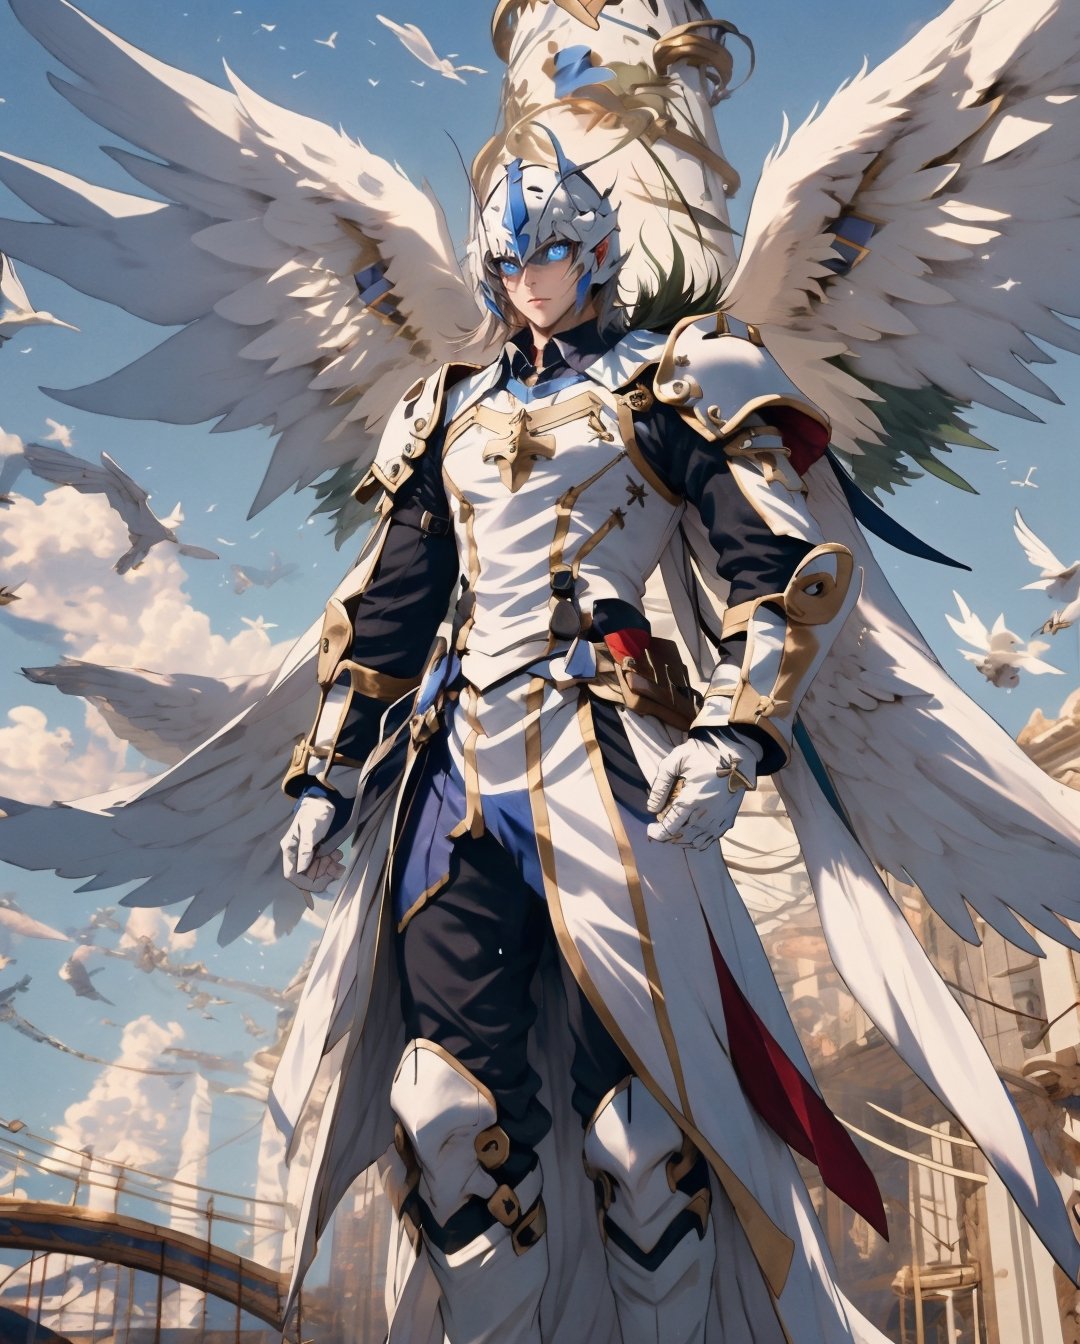 Medieval equipment,  left man and right woman, knights (ensemble stars!),armor, wings, sky,white armor, cloud, outdoors, angel wings, bird,blend, medium shot, bokeh, combat scene, action_pose